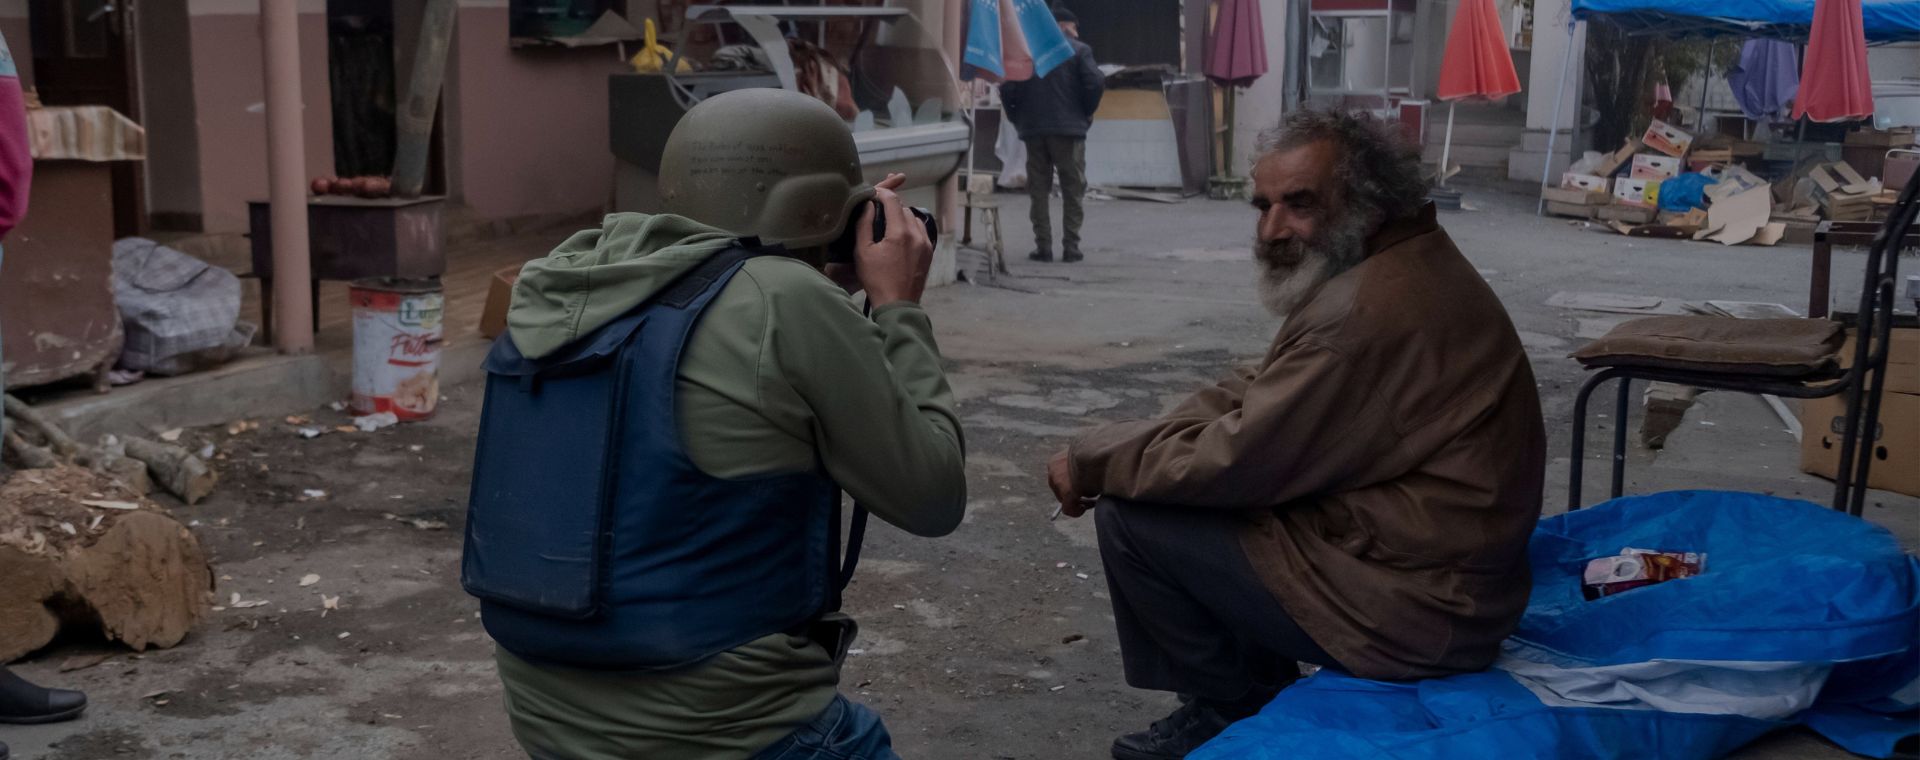 A photographer wearing protective flak jacket and helmet photographing an elderly local man during a military conflict between Armenian and Azerbaijani forces at the central market in Stepanakert 